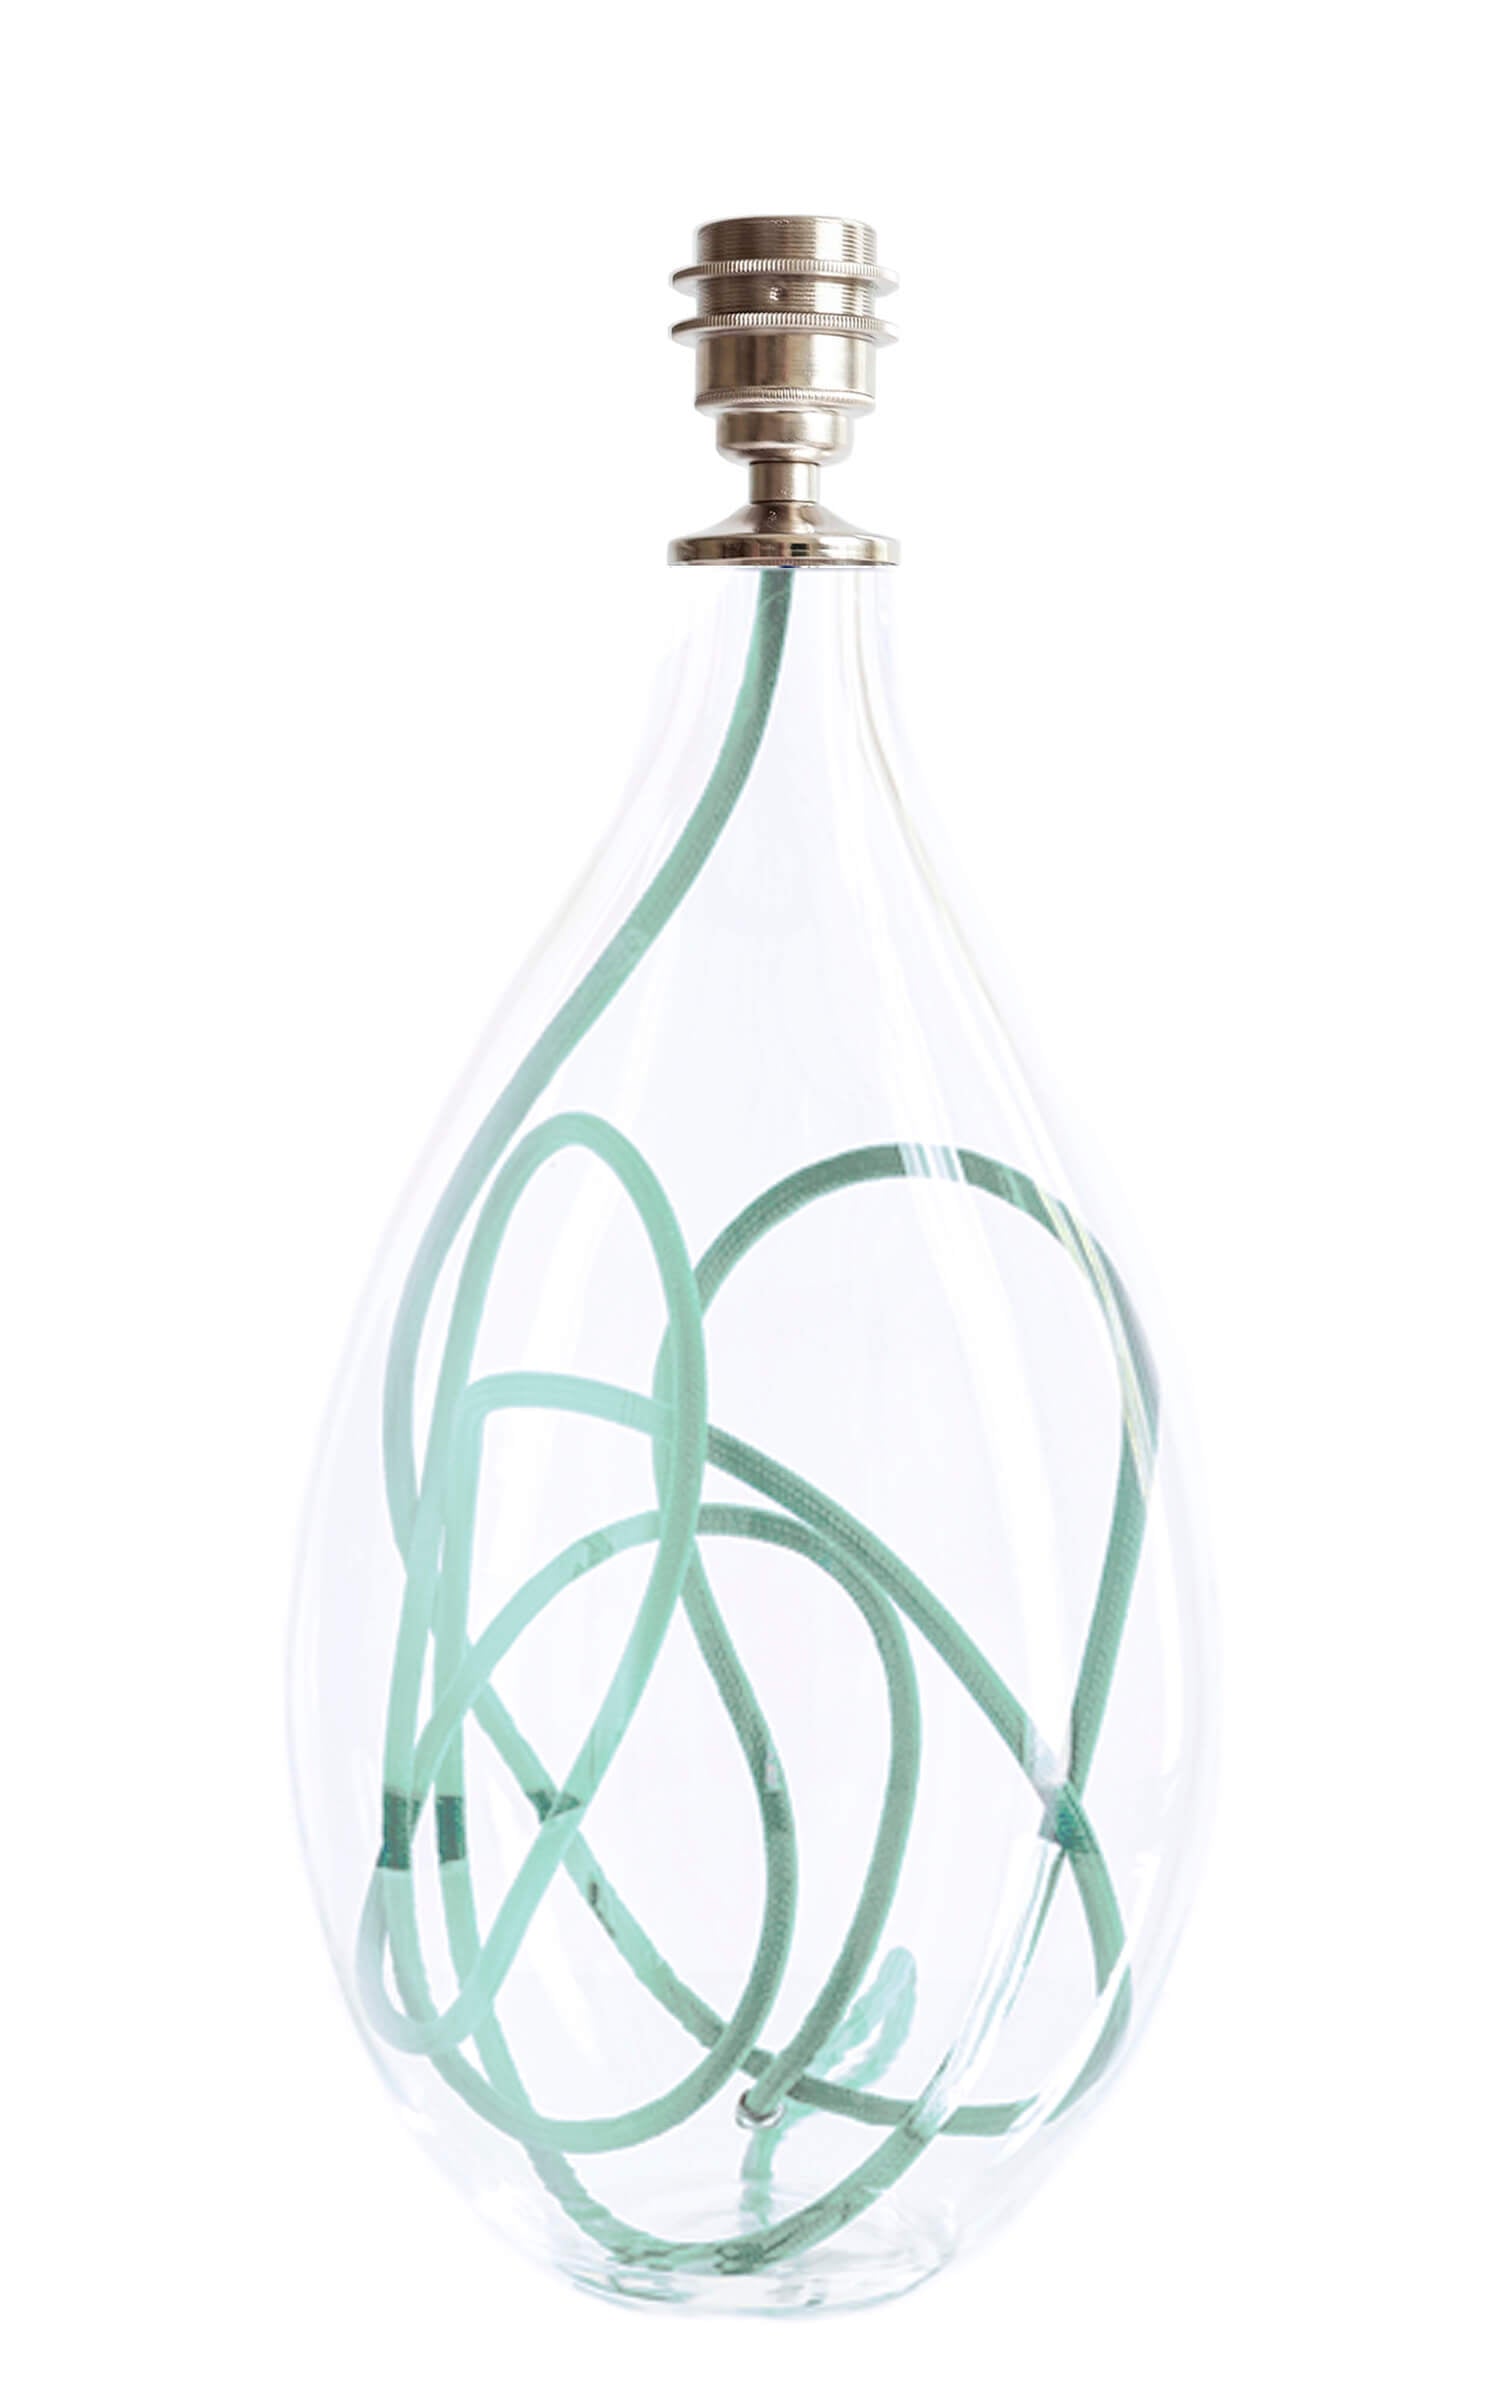 Glass lamp base with jade flex, designed by Anna Jacobs